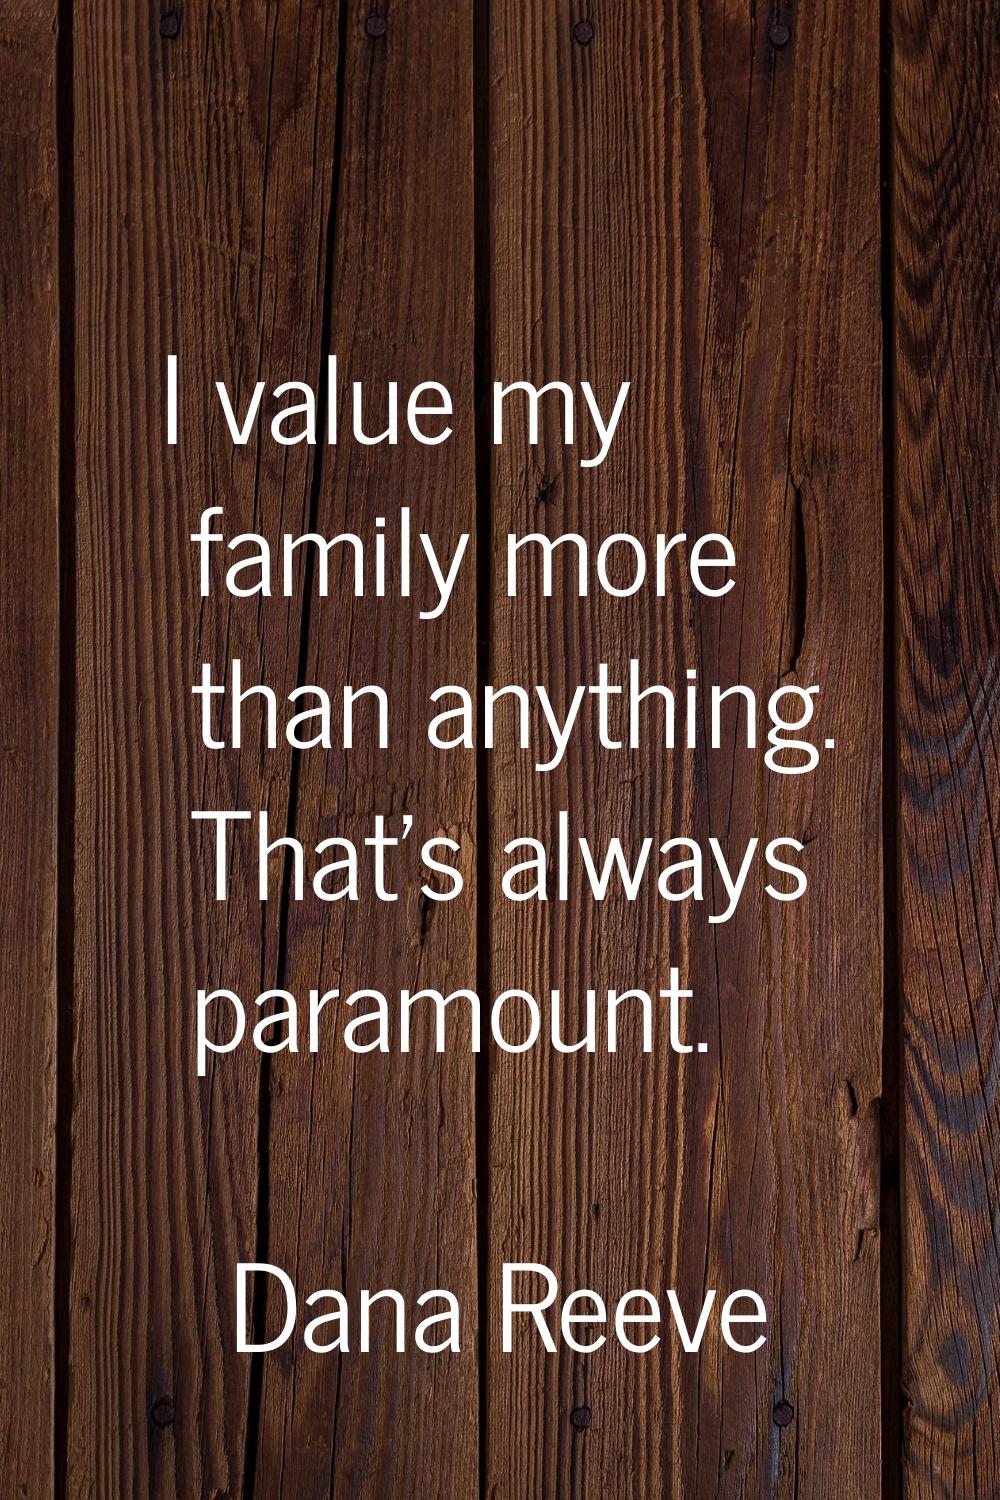 I value my family more than anything. That's always paramount.